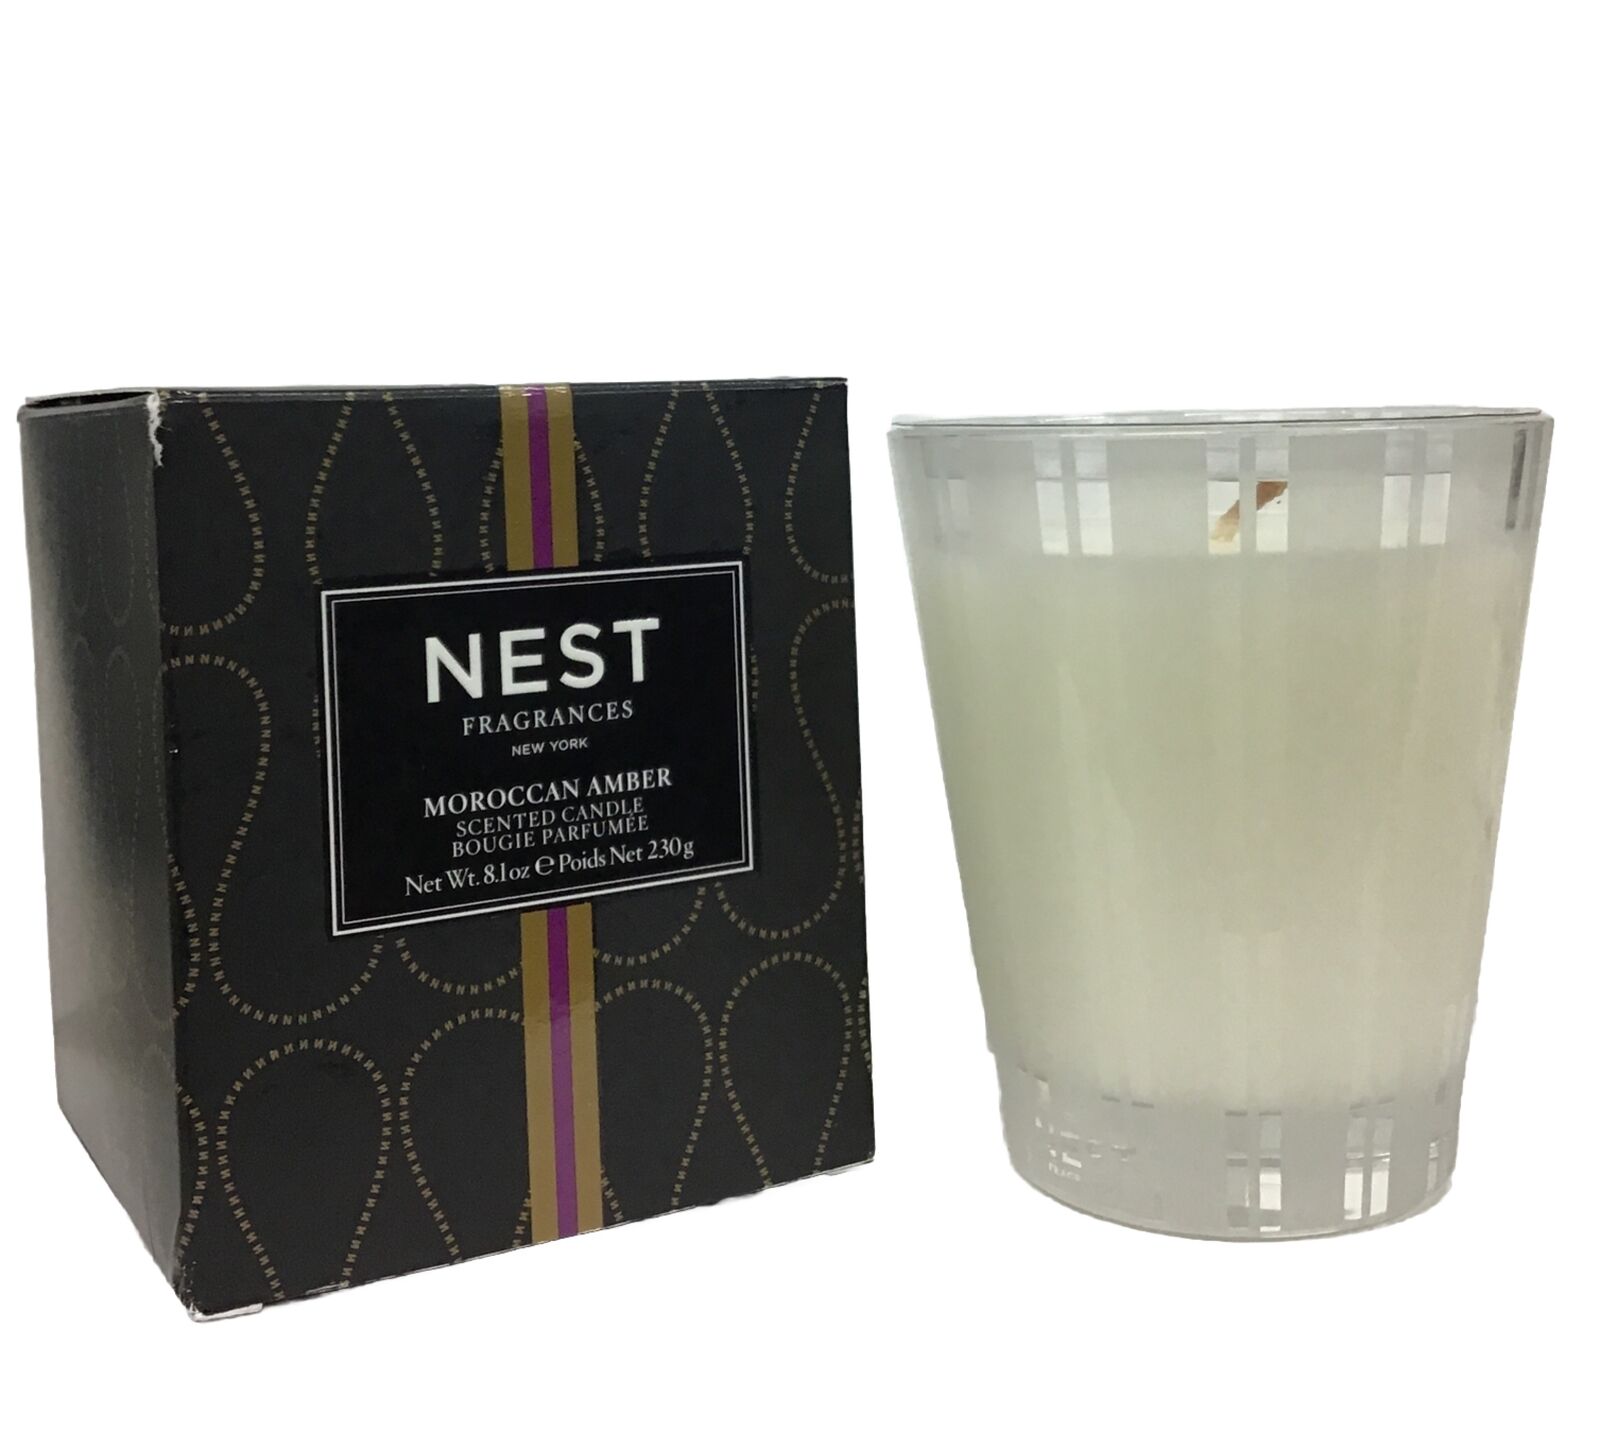 Nest Fragrances | Moroccan Amber | Scented Candle 8.1 Oz, As Pictured.